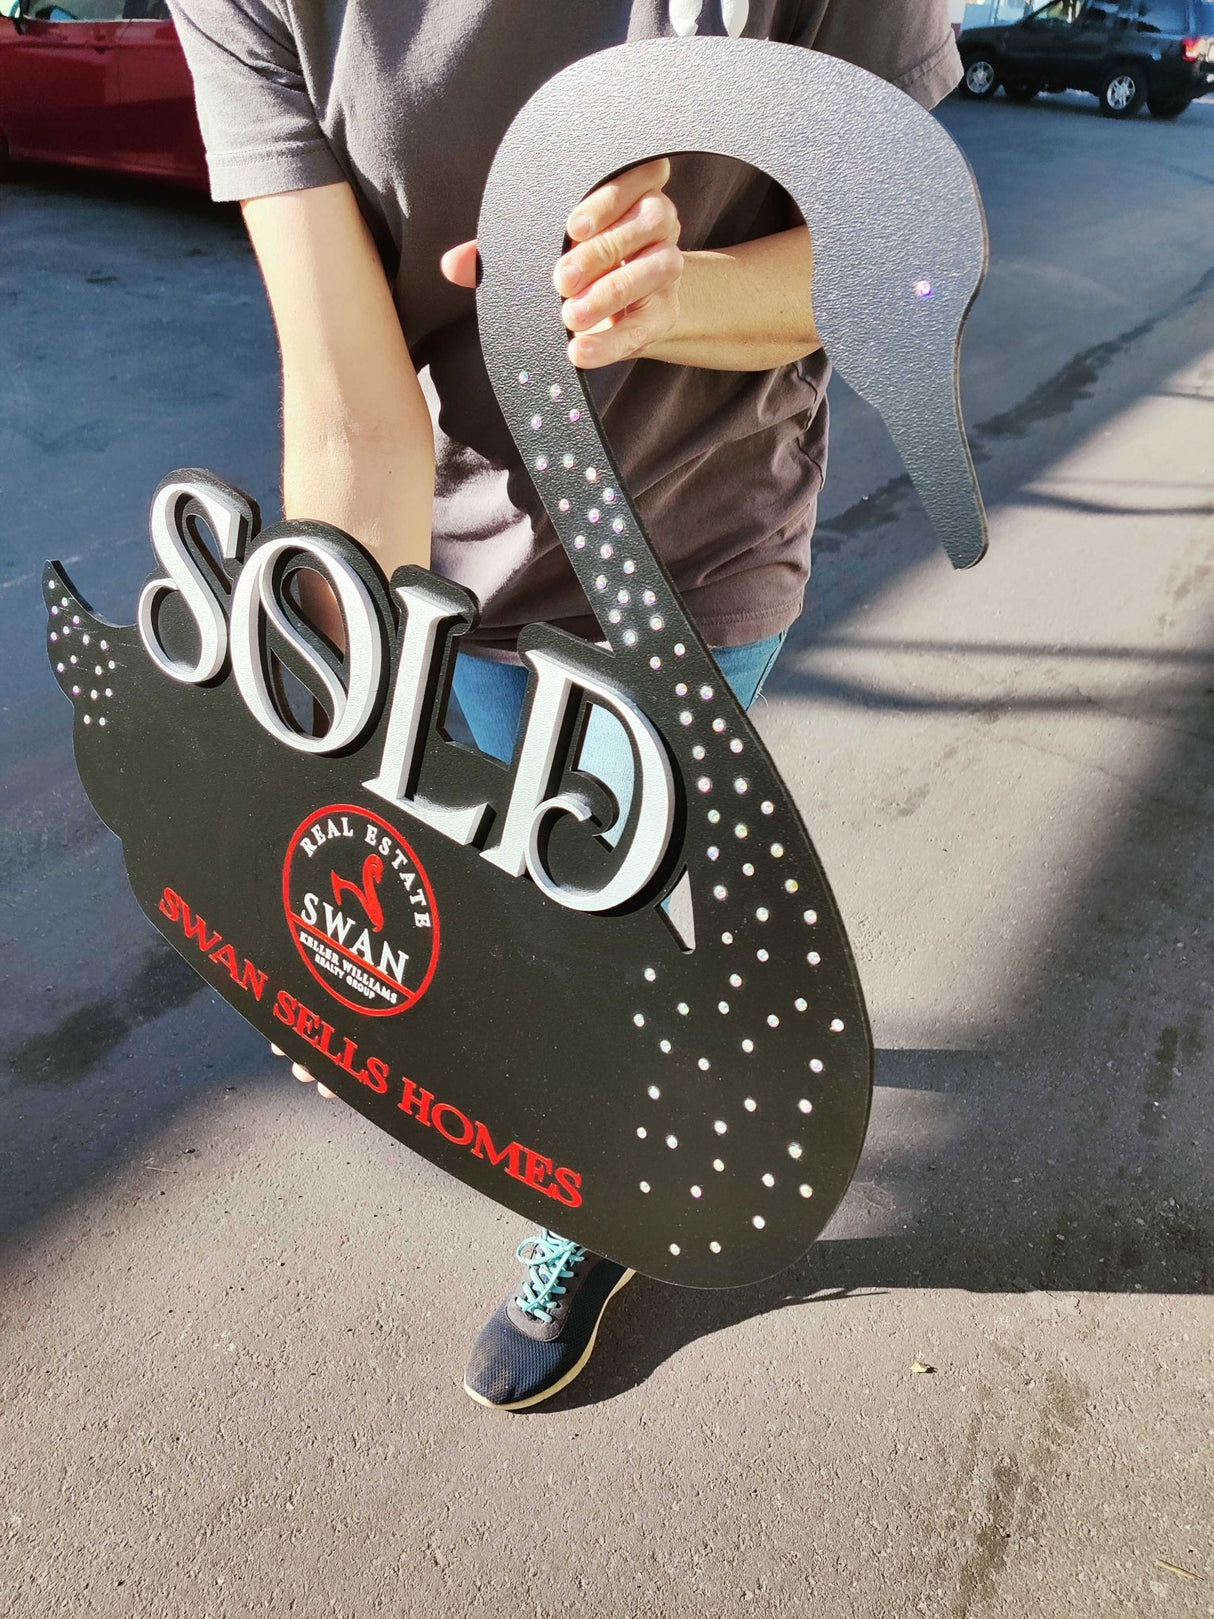 Key Shaped Props Personalized Sign Featuring Authentic Rhinestones - Ideal Gift for Realtors - Real Estate Store